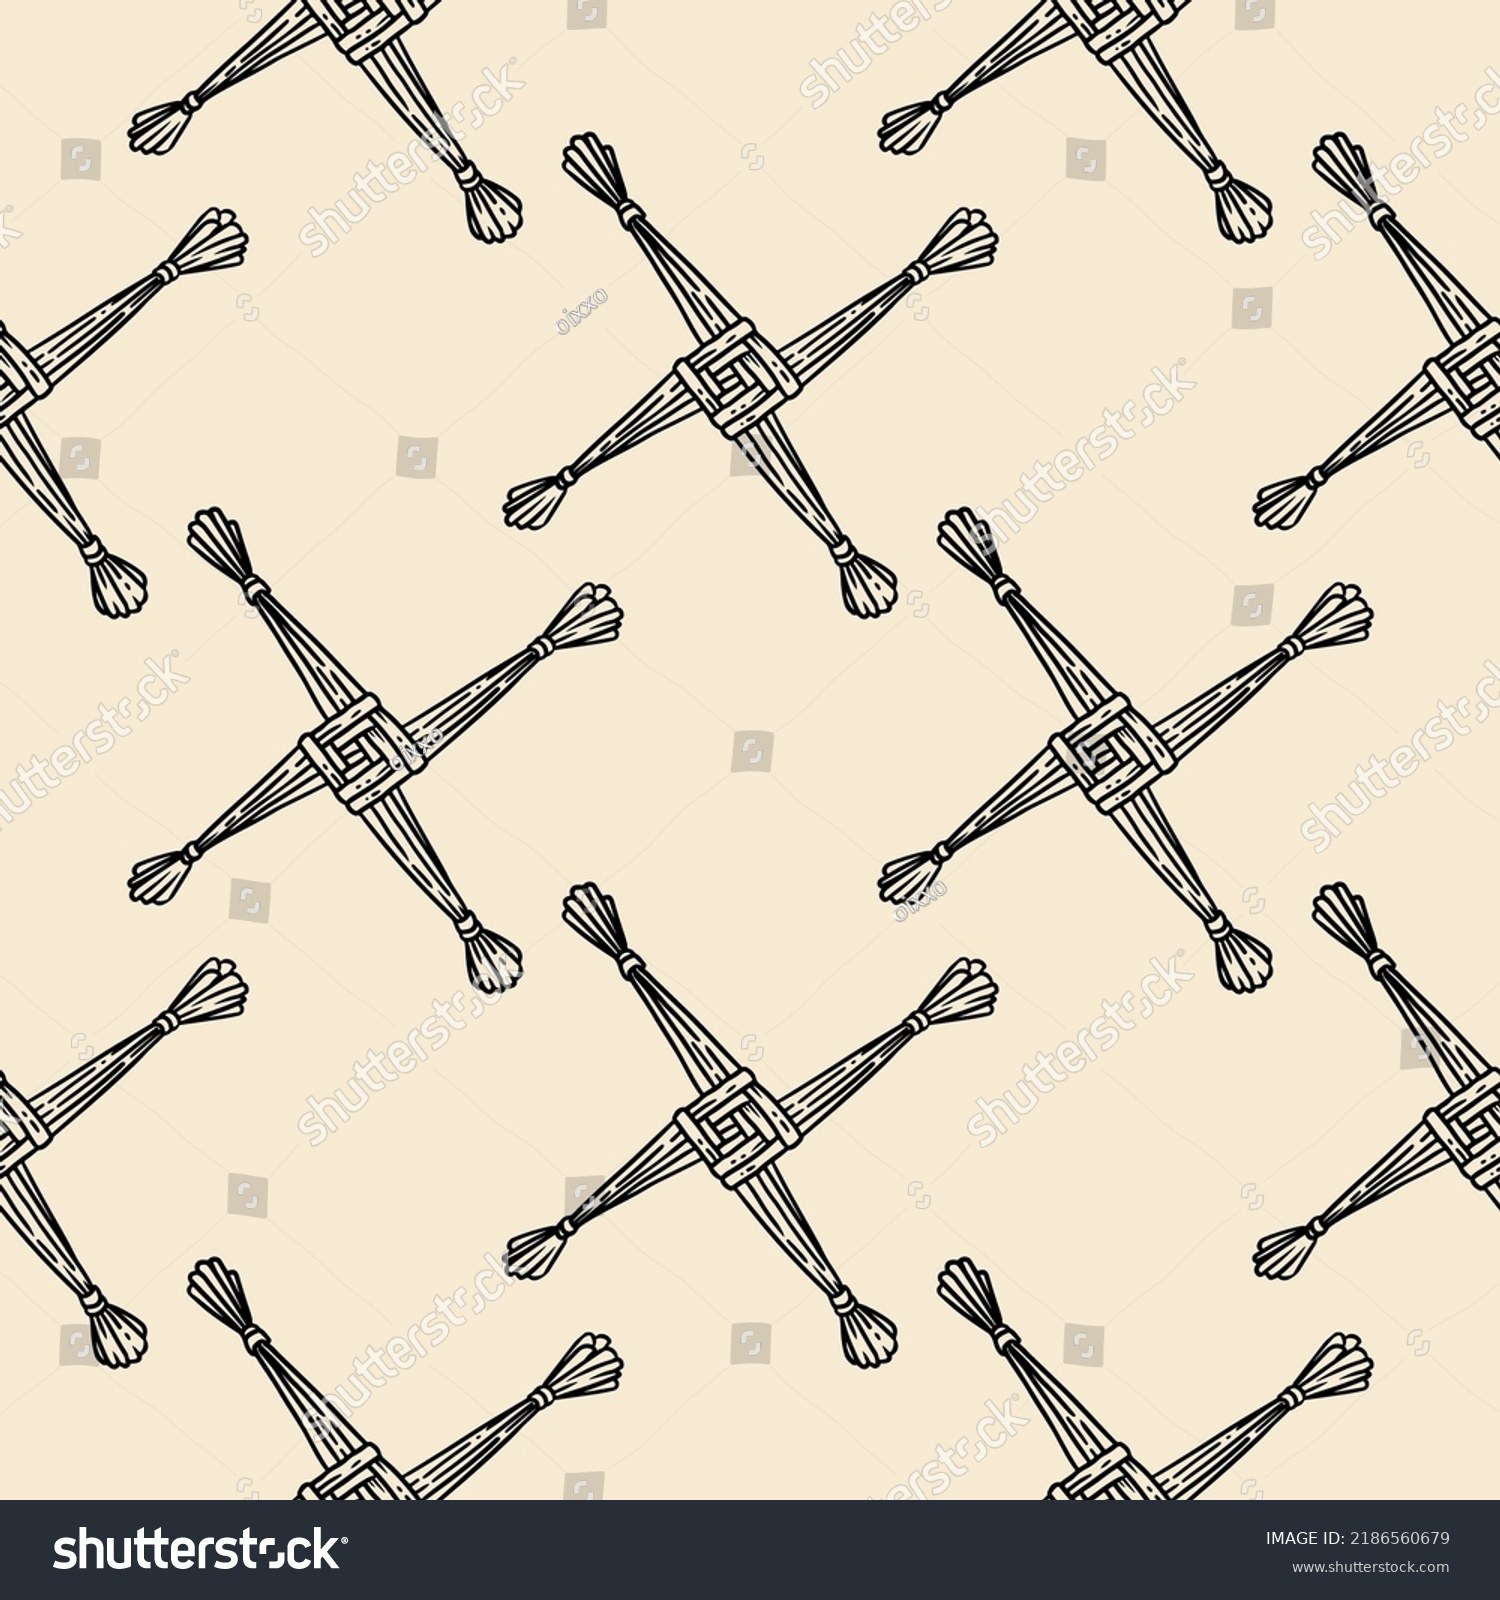 SVG of Brigid's Cross made of straw hand-drawn seamless pattern. Wiccan pagan print background. Stock texture tile svg